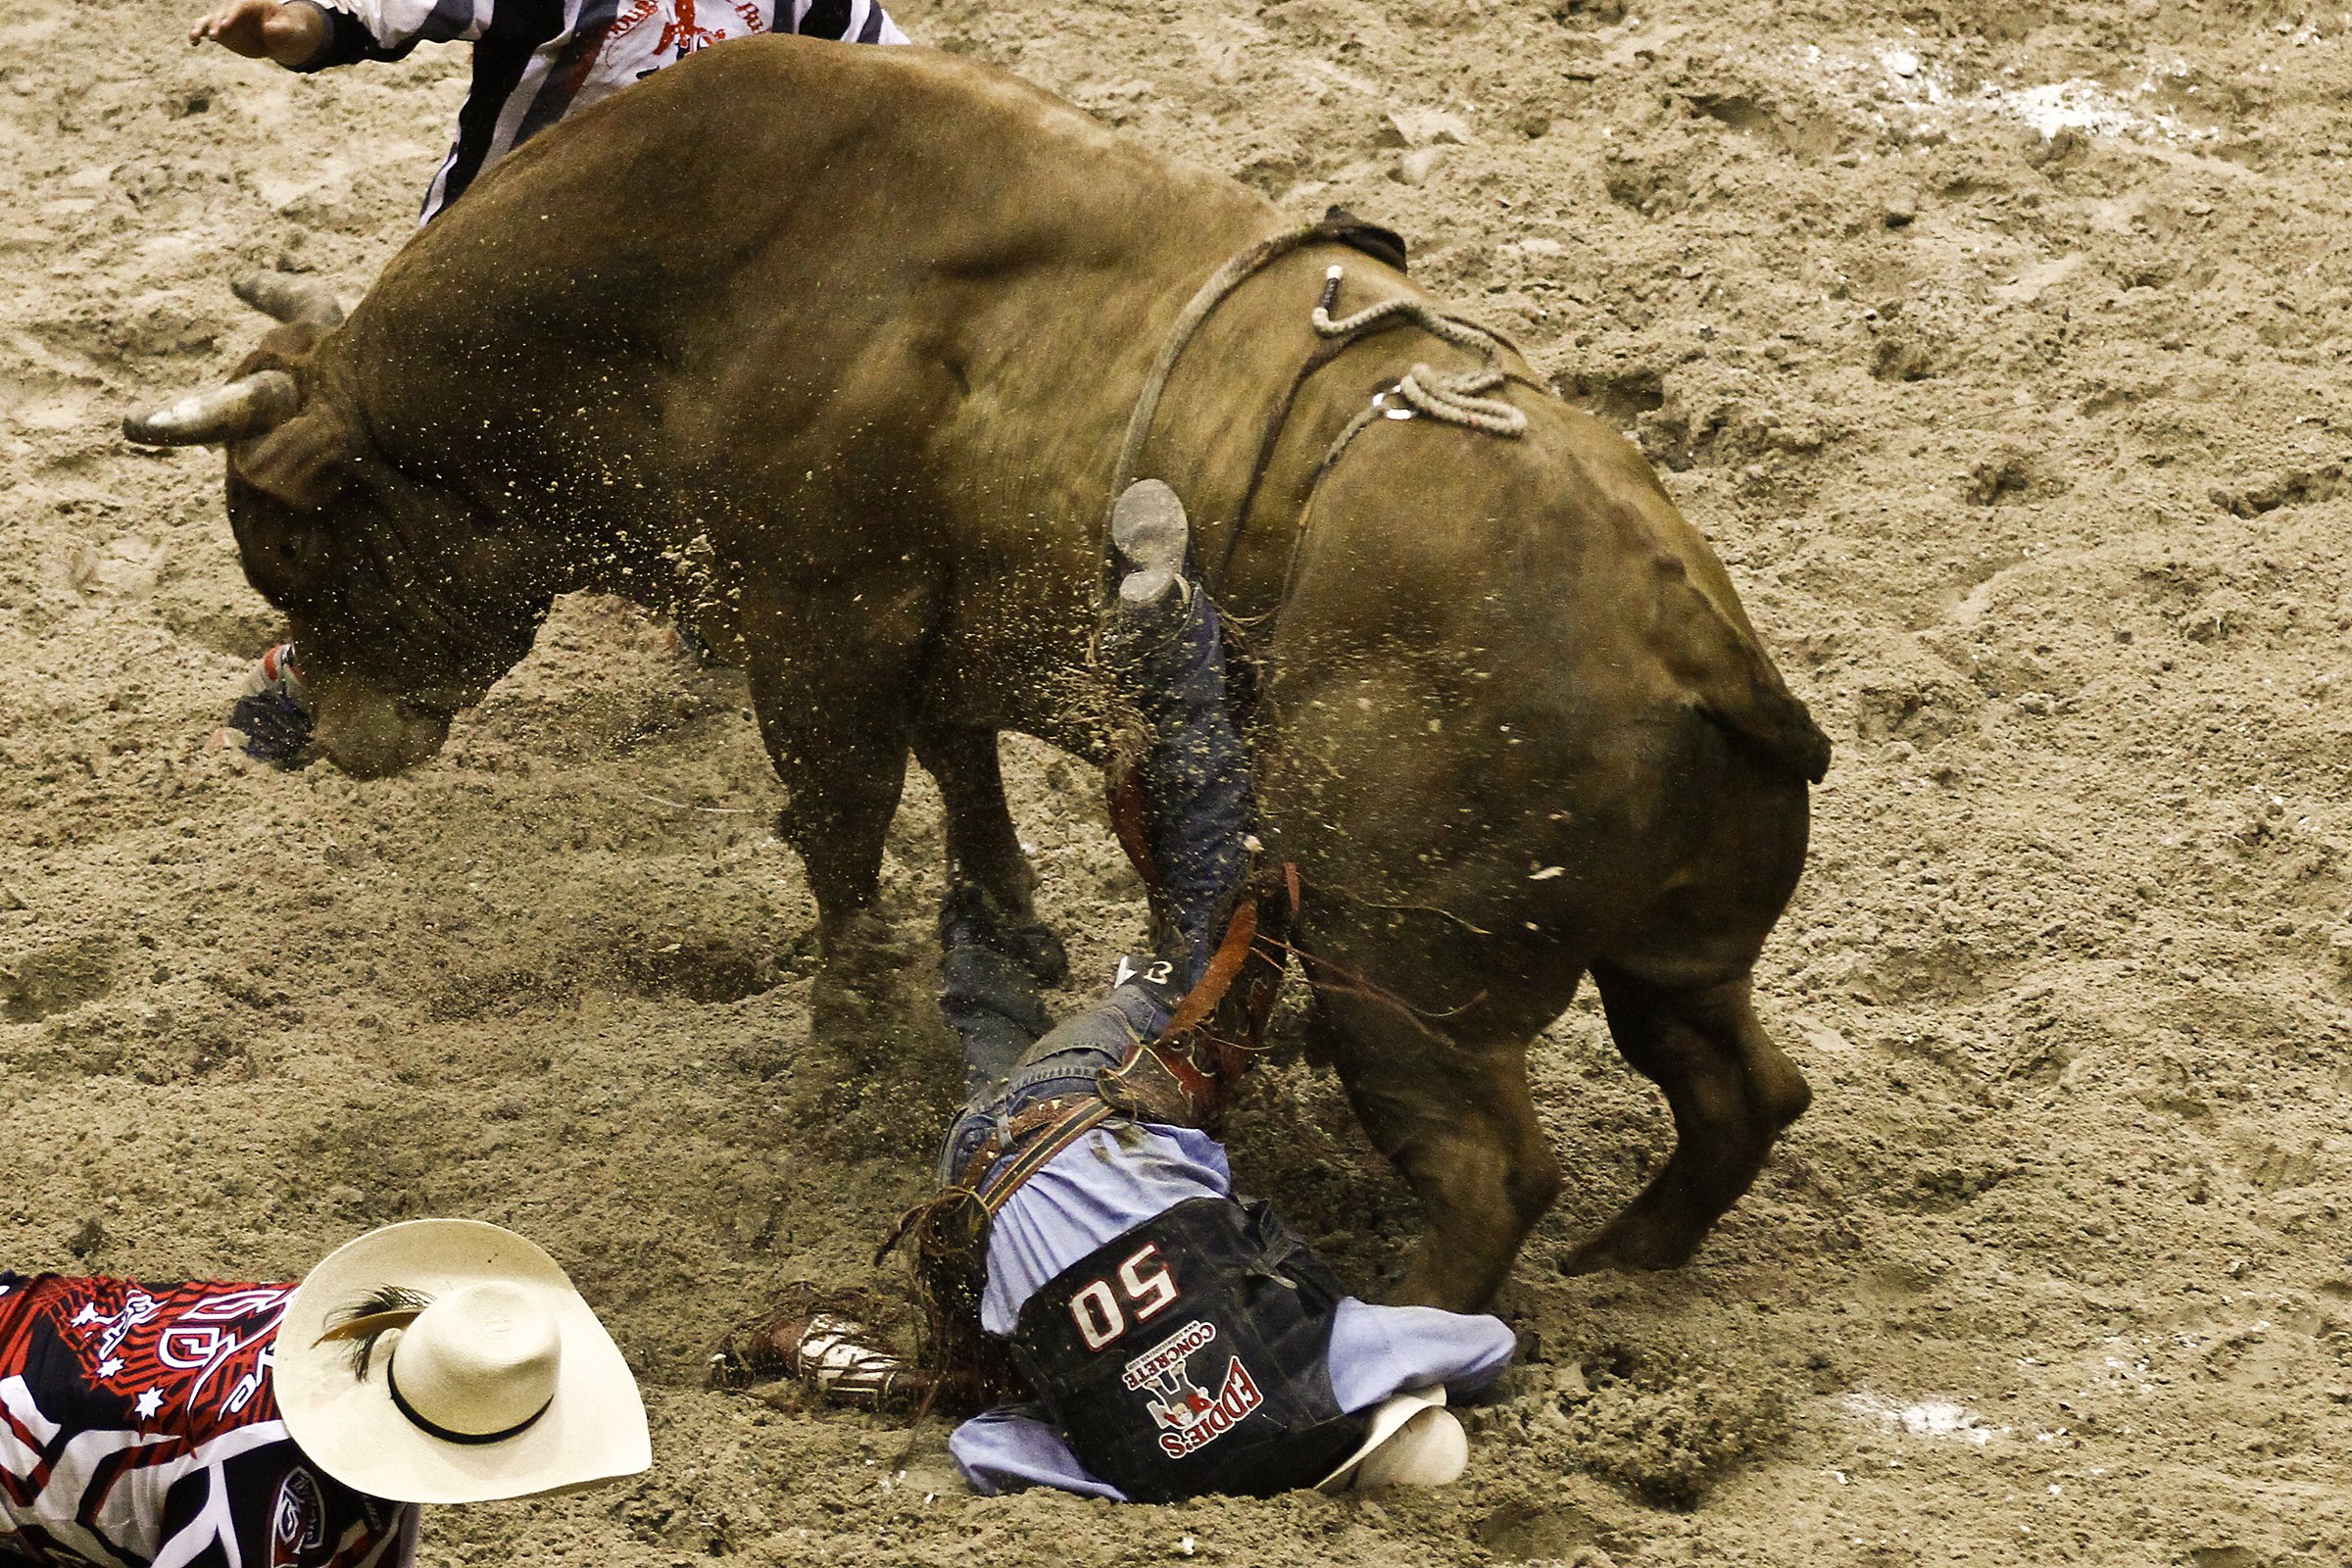 Bull Riding Bullrider Rodeo Western Cowboy Extreme Cow